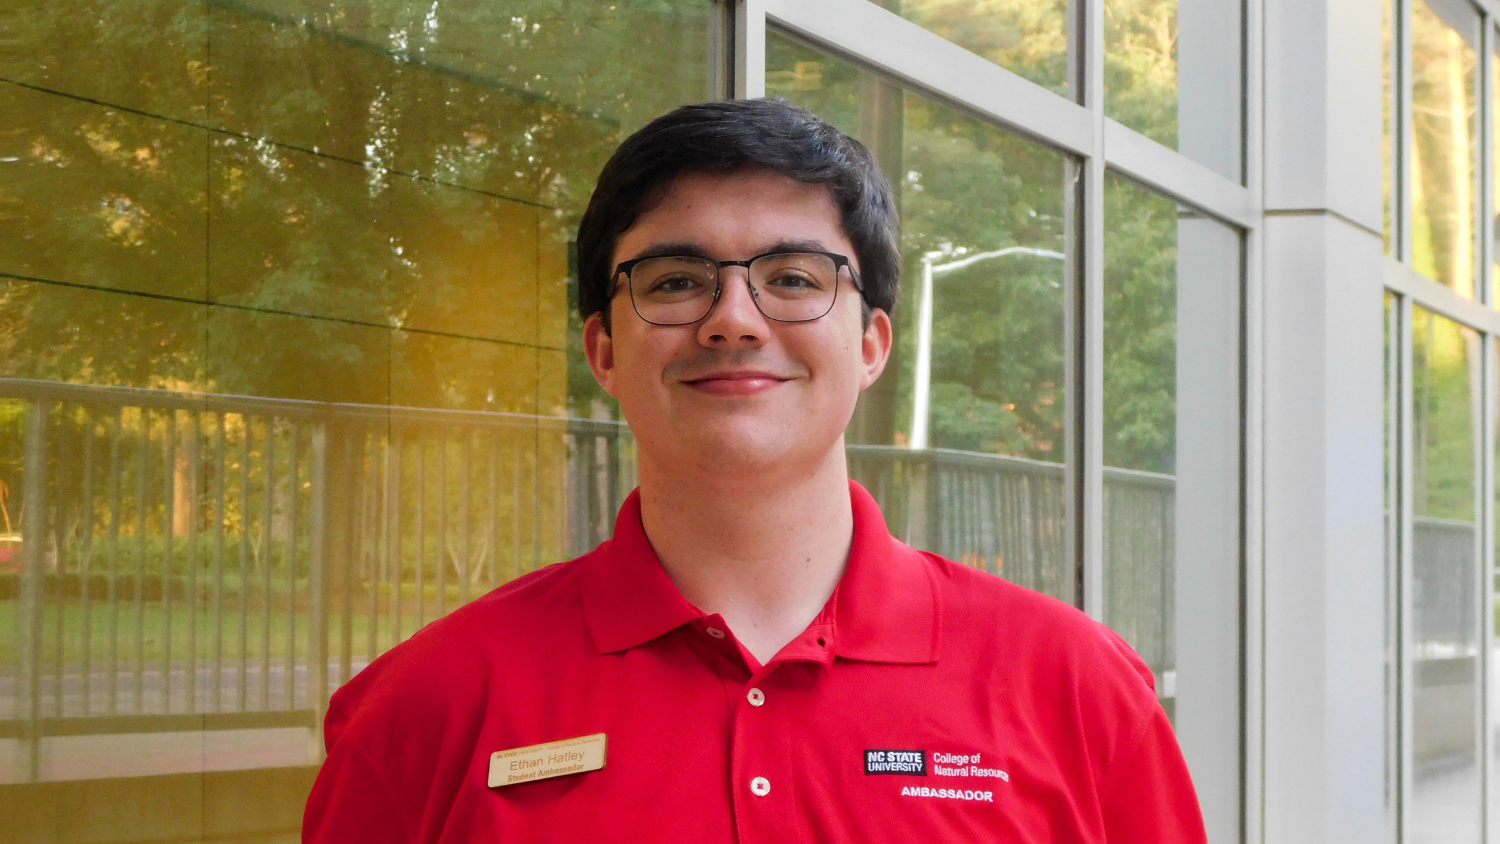 Ethan Hatley - College of Natural Resources Ambassadors - College of Natural Resources at NC State University